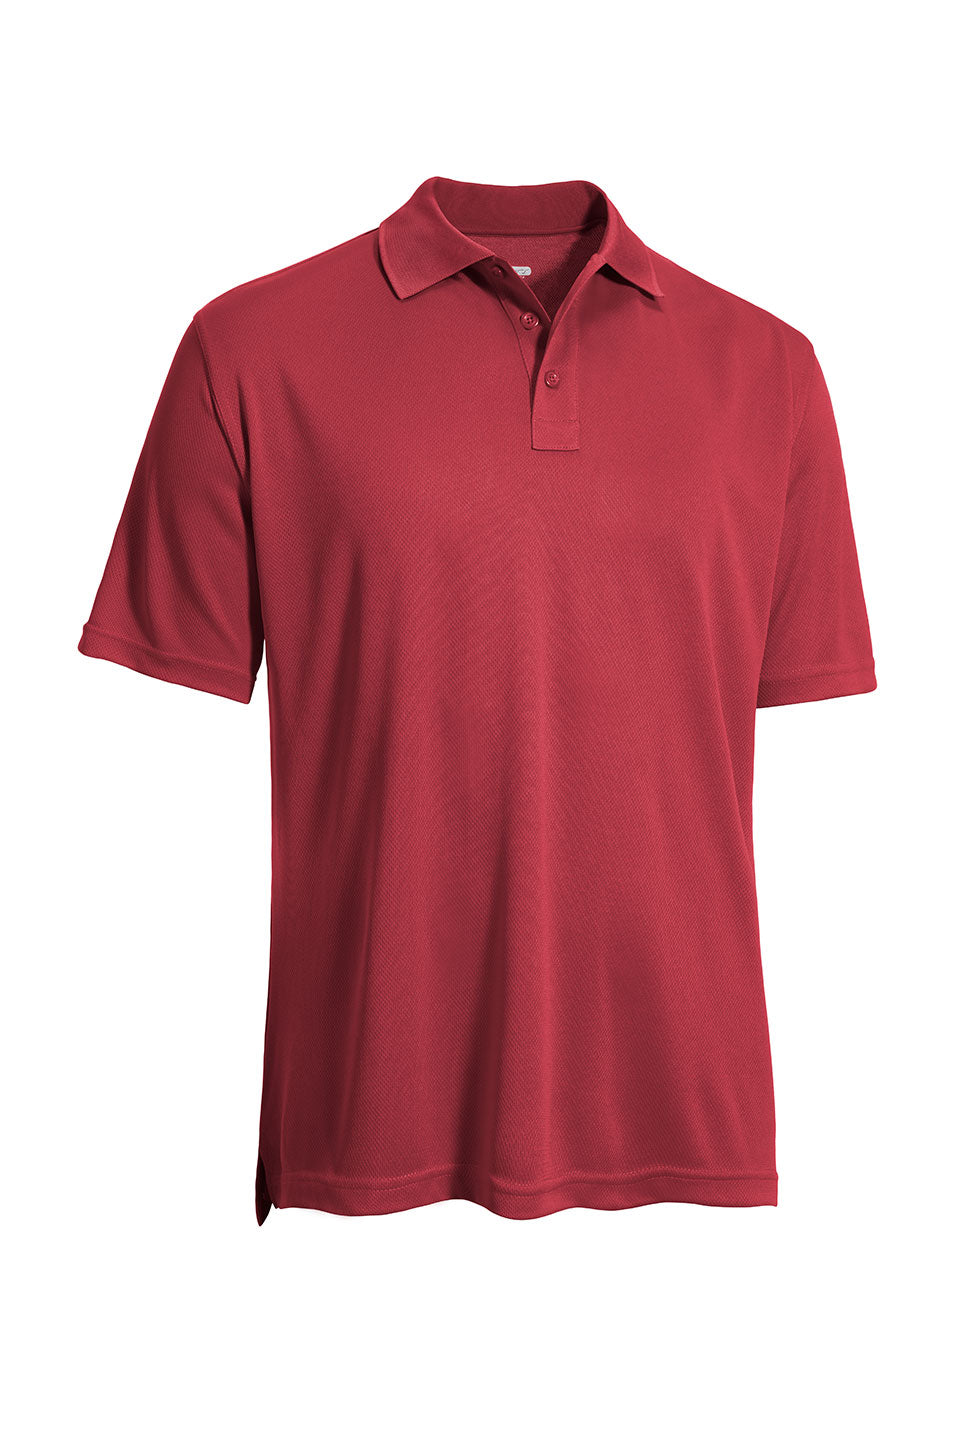 Expert Brand Wholesale Men's Oxymesh City Polo in cardinal image 2#cardinal